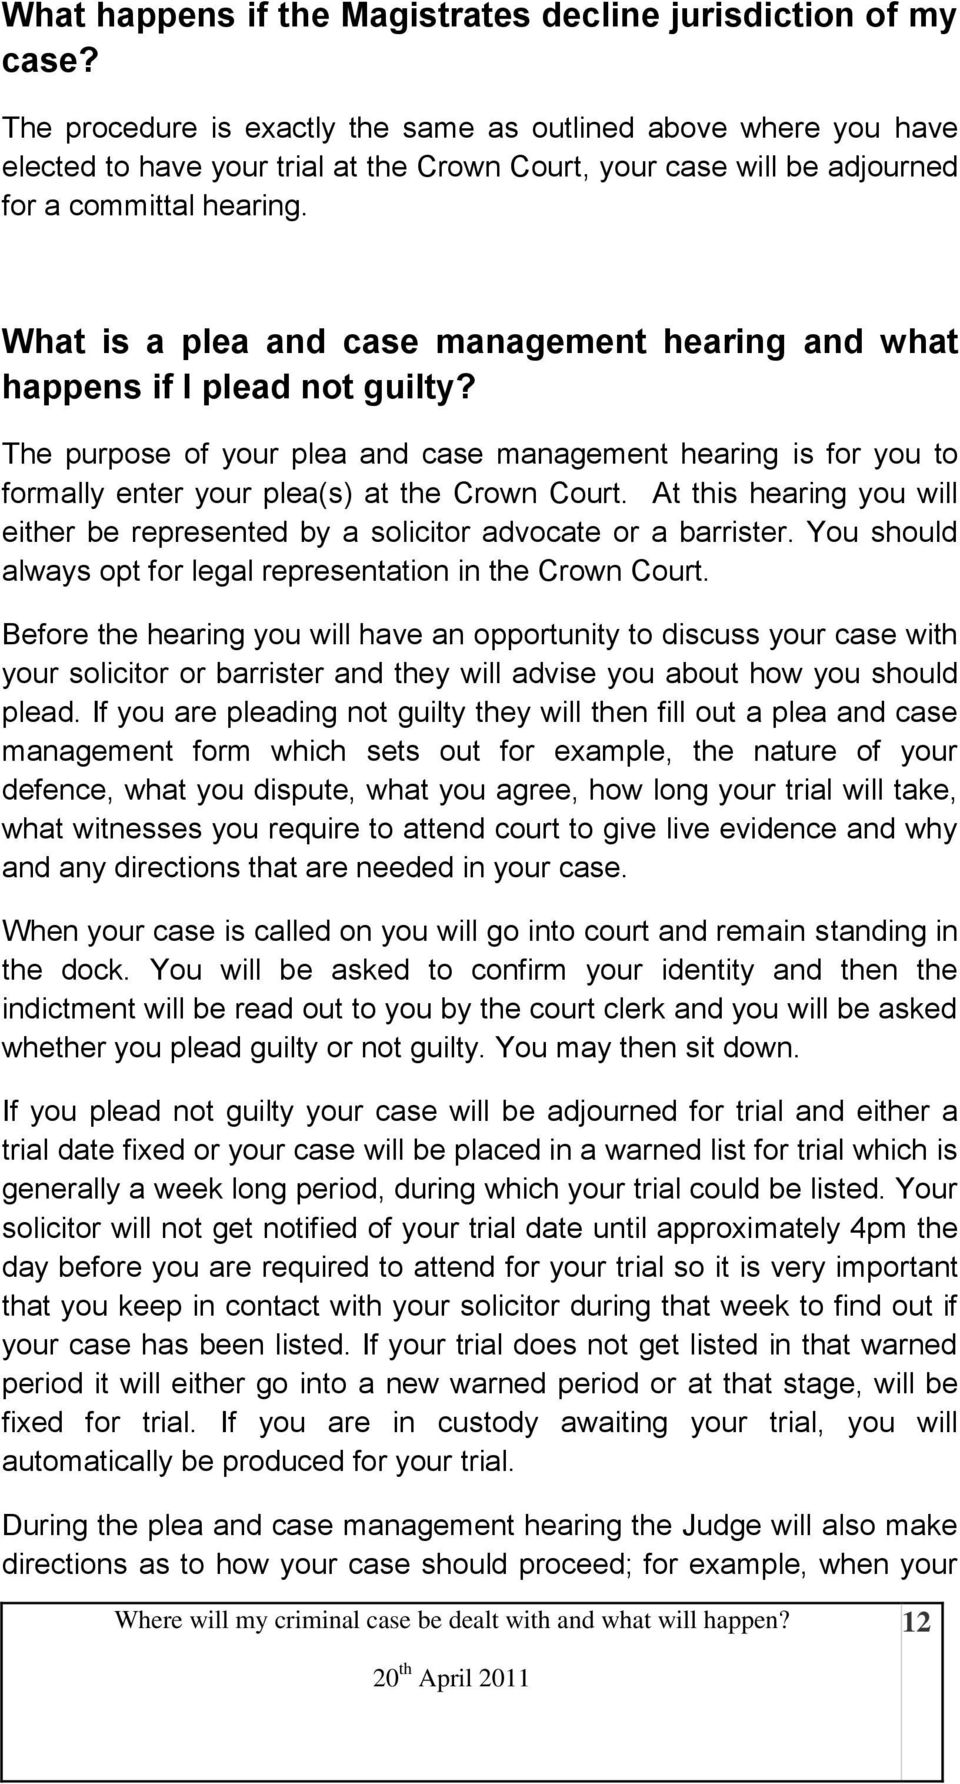 What is a plea and case management hearing and what happens if I plead not guilty? The purpose of your plea and case management hearing is for you to formally enter your plea(s) at the Crown Court.